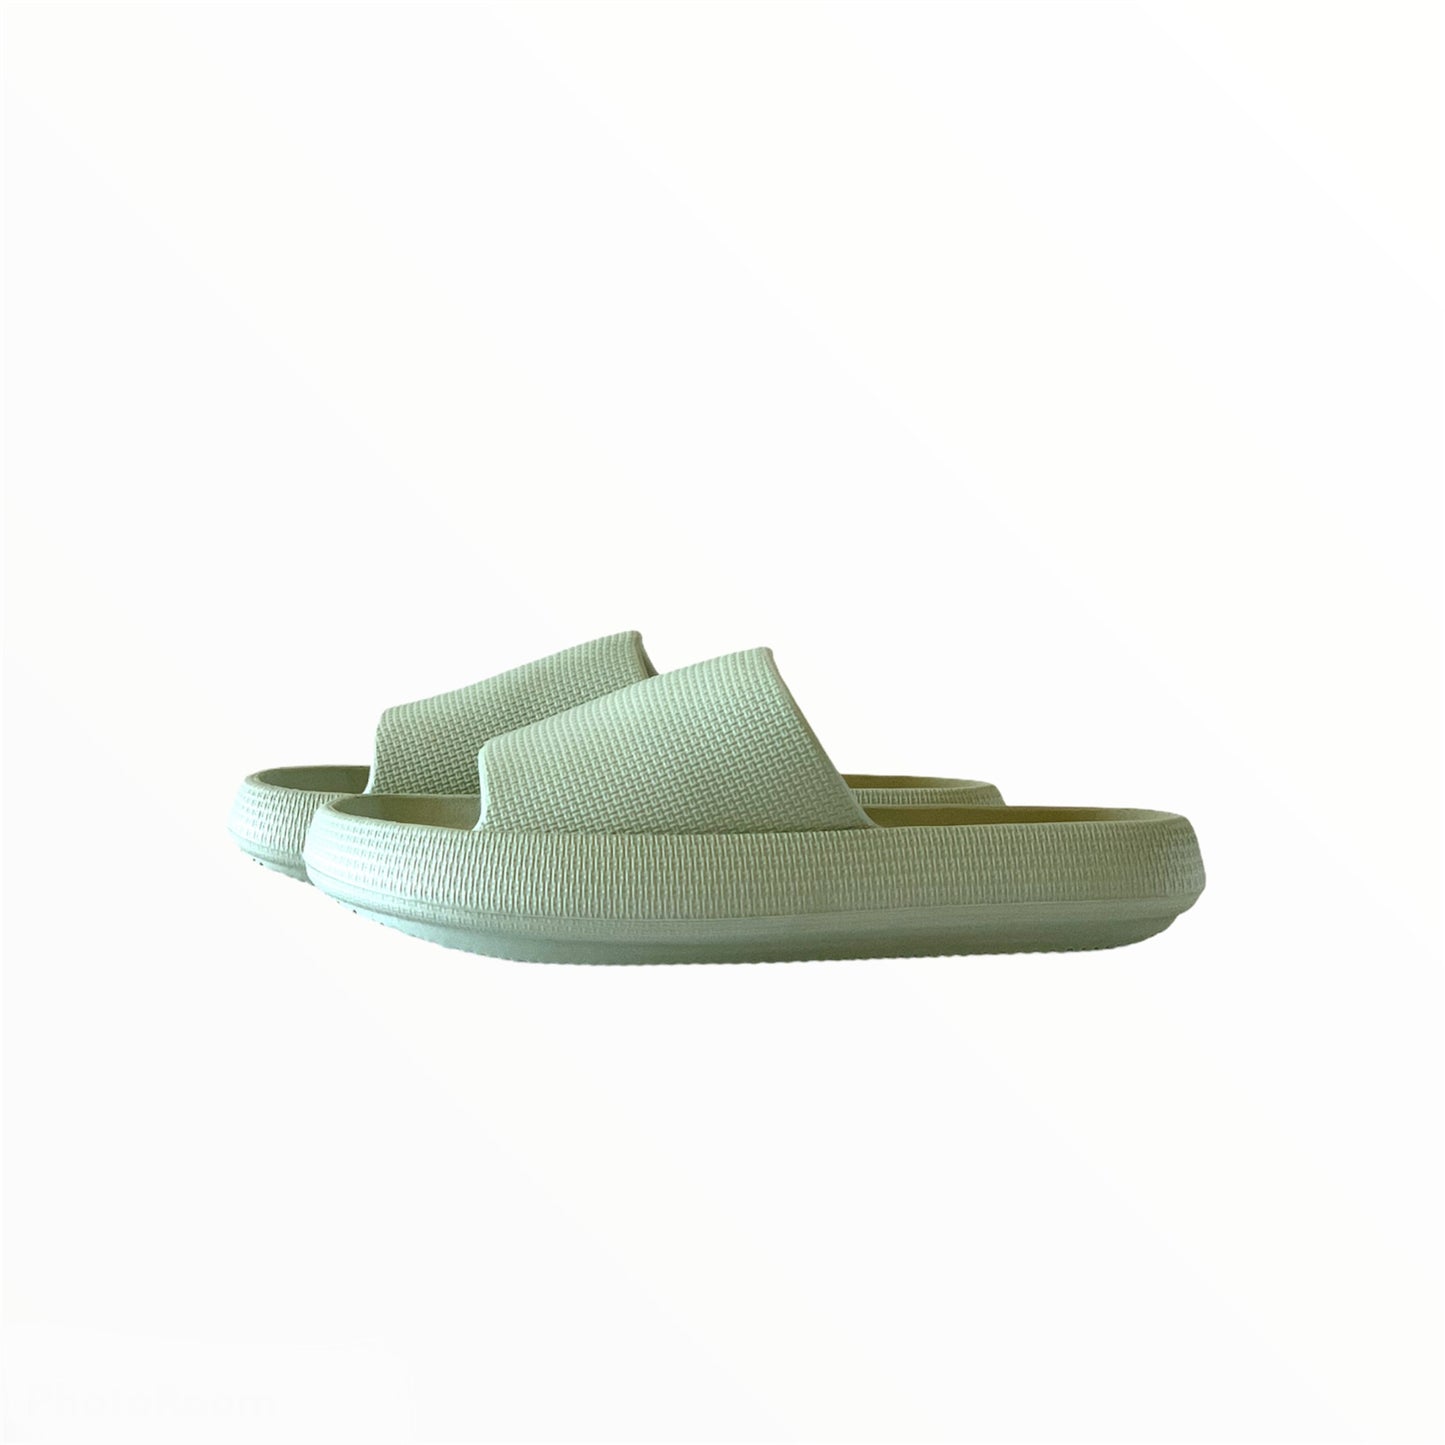 Anti-slip slippers, arch support sandals, washable and waterproof slippers, thick sole slippers, moss green avocado color. 